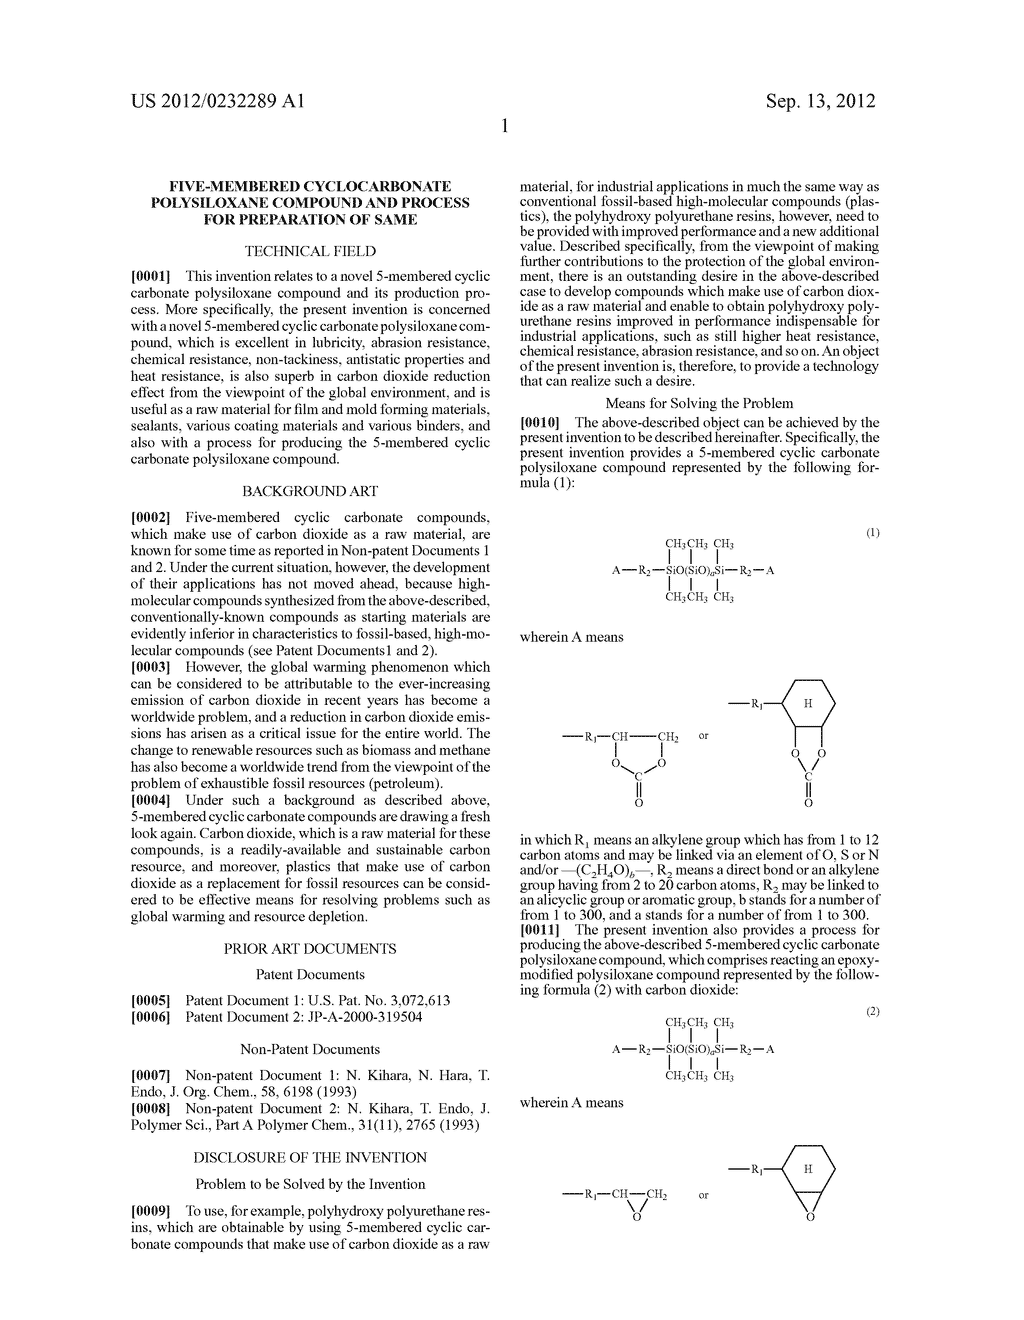 FIVE-MEMBERED CYCLOCARBONATE POLYSILOXANE COMPOUND AND PROCESS FOR     PREPARATION OF SAME - diagram, schematic, and image 04